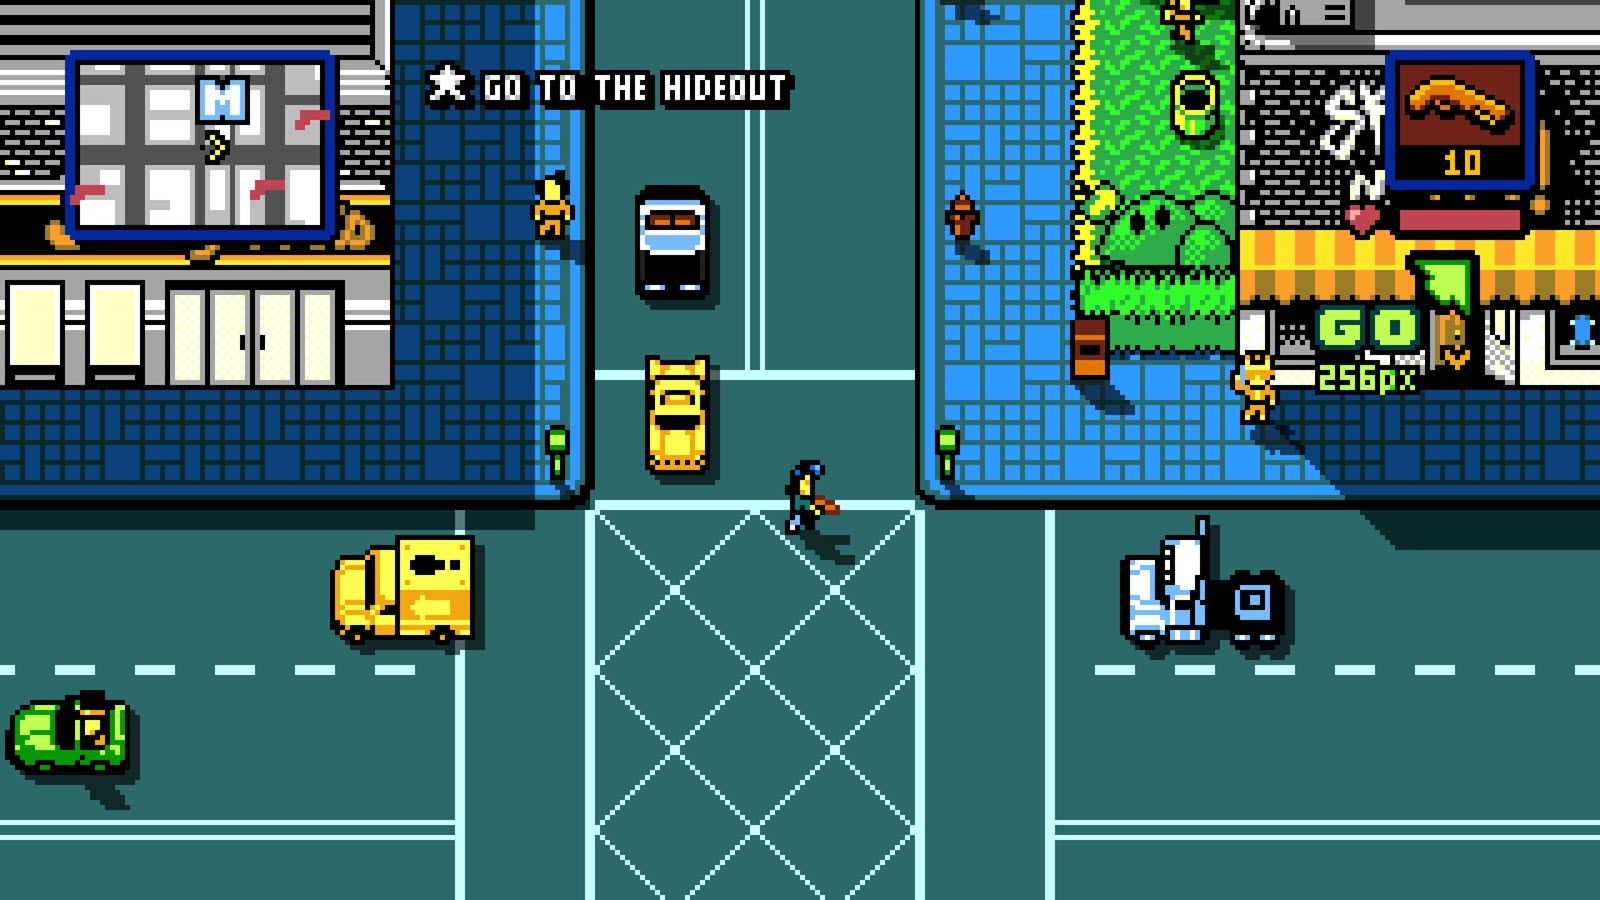 A 8-bit style game with a man holding a gun crossing the street.